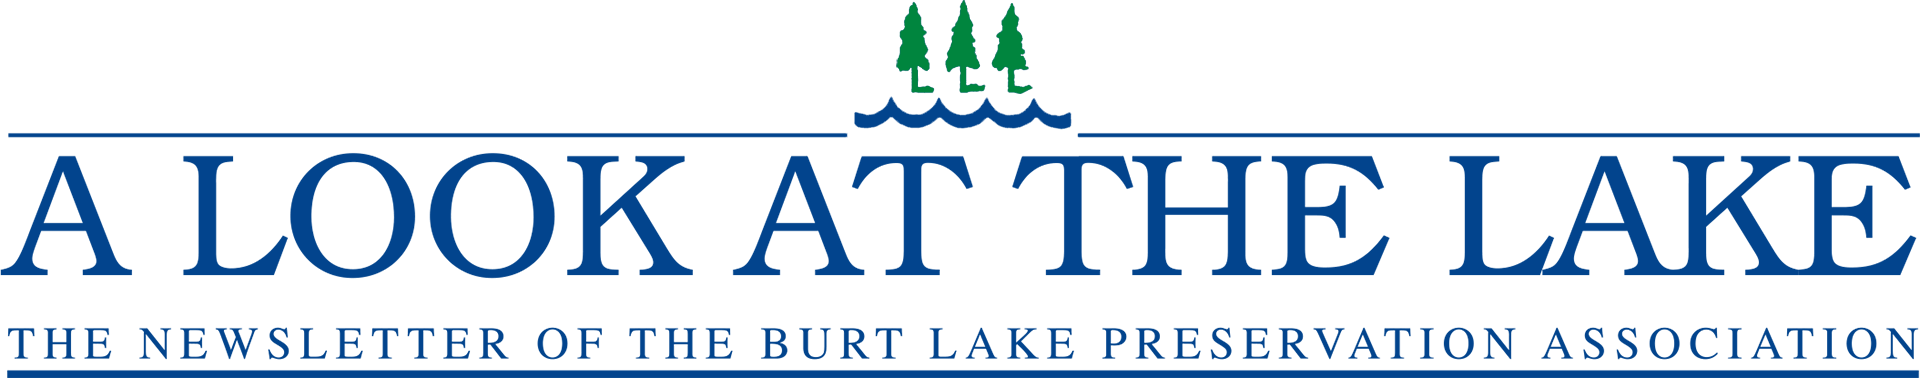 A Look At The Lake: The Newsletter of the Burt Lake Preservation Association